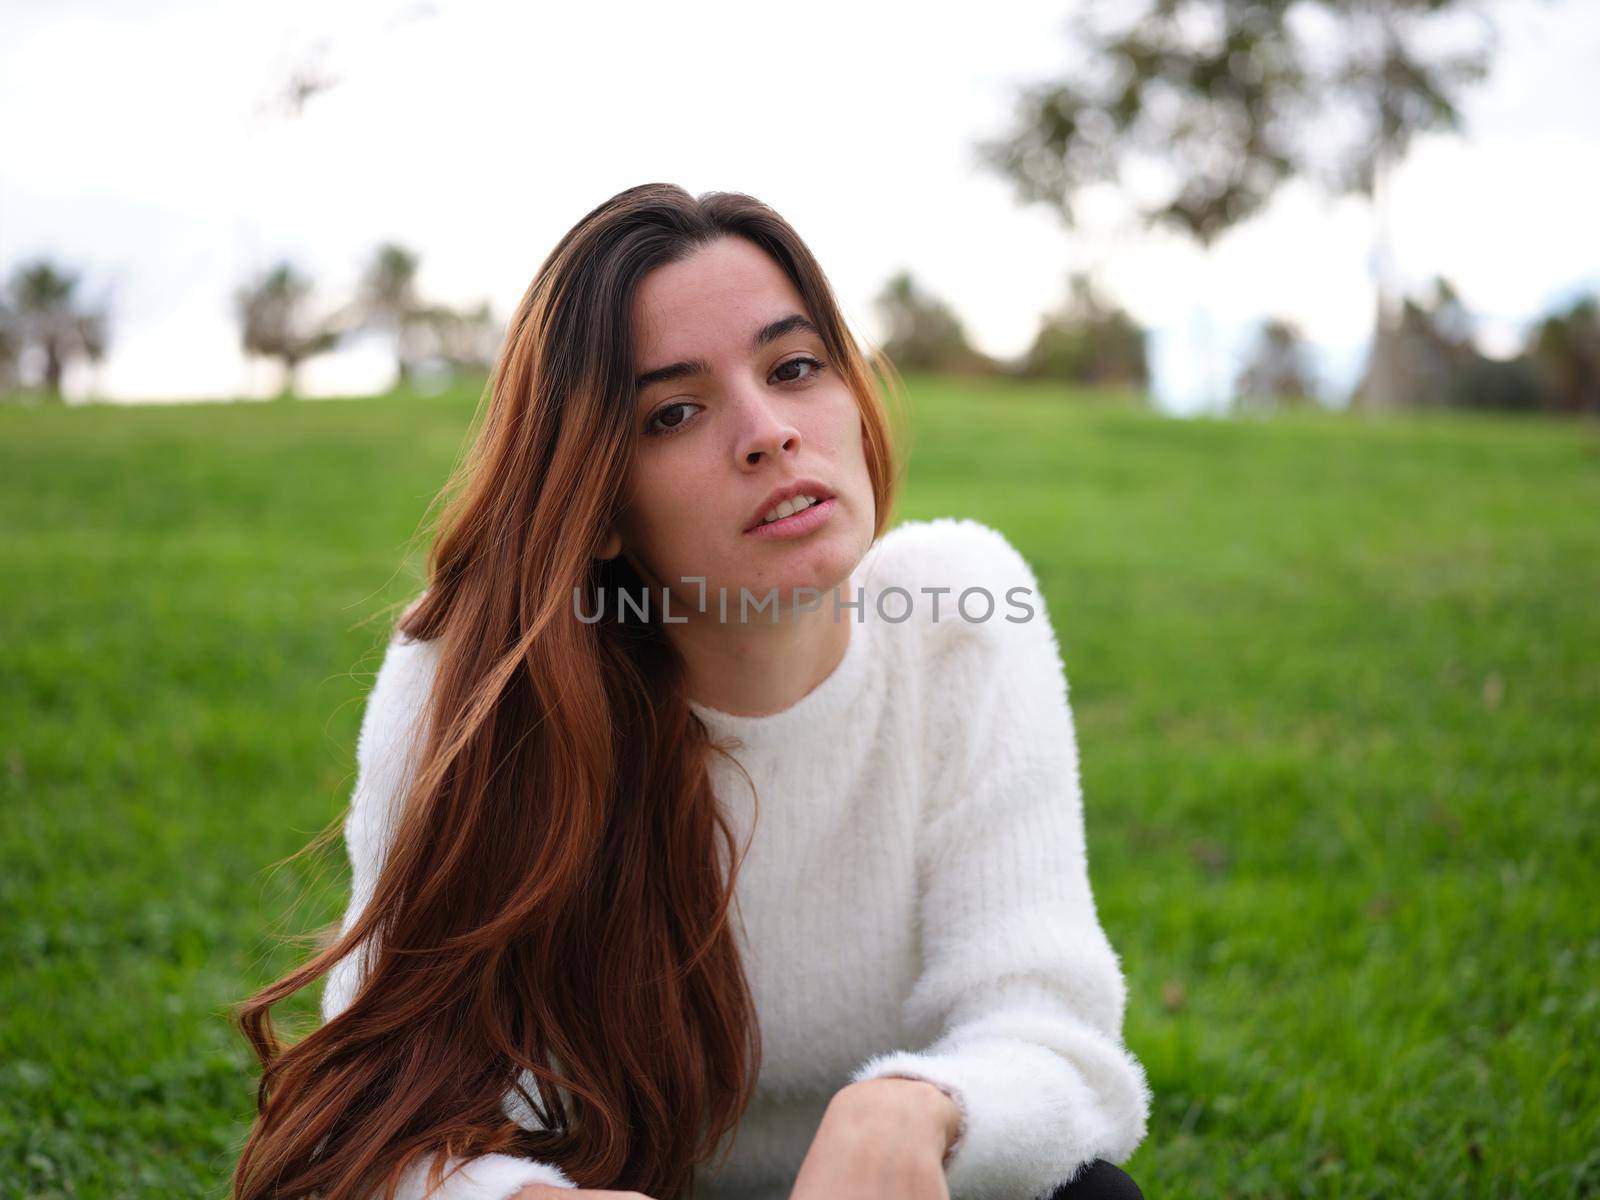 A young woman in the park looking at the camera seriously with a revengeful expression by WesternExoticStockers